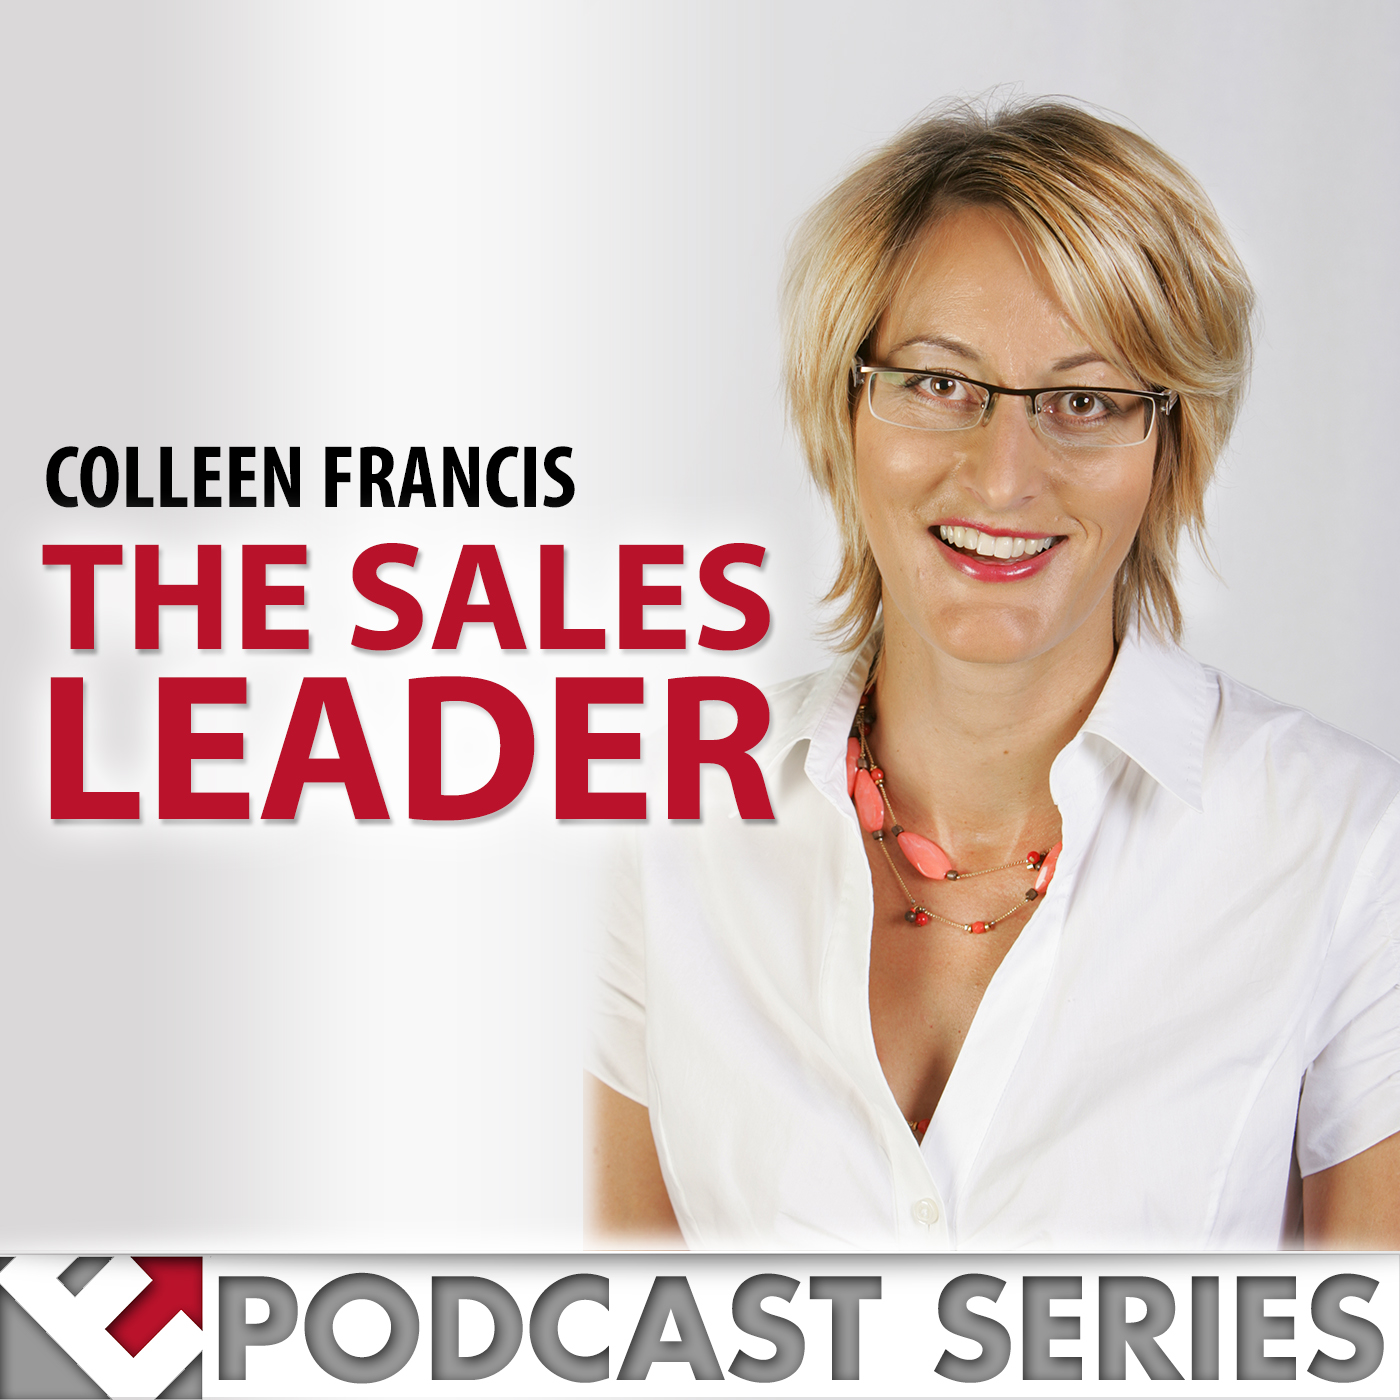 Podcast Series: The Sales Leader